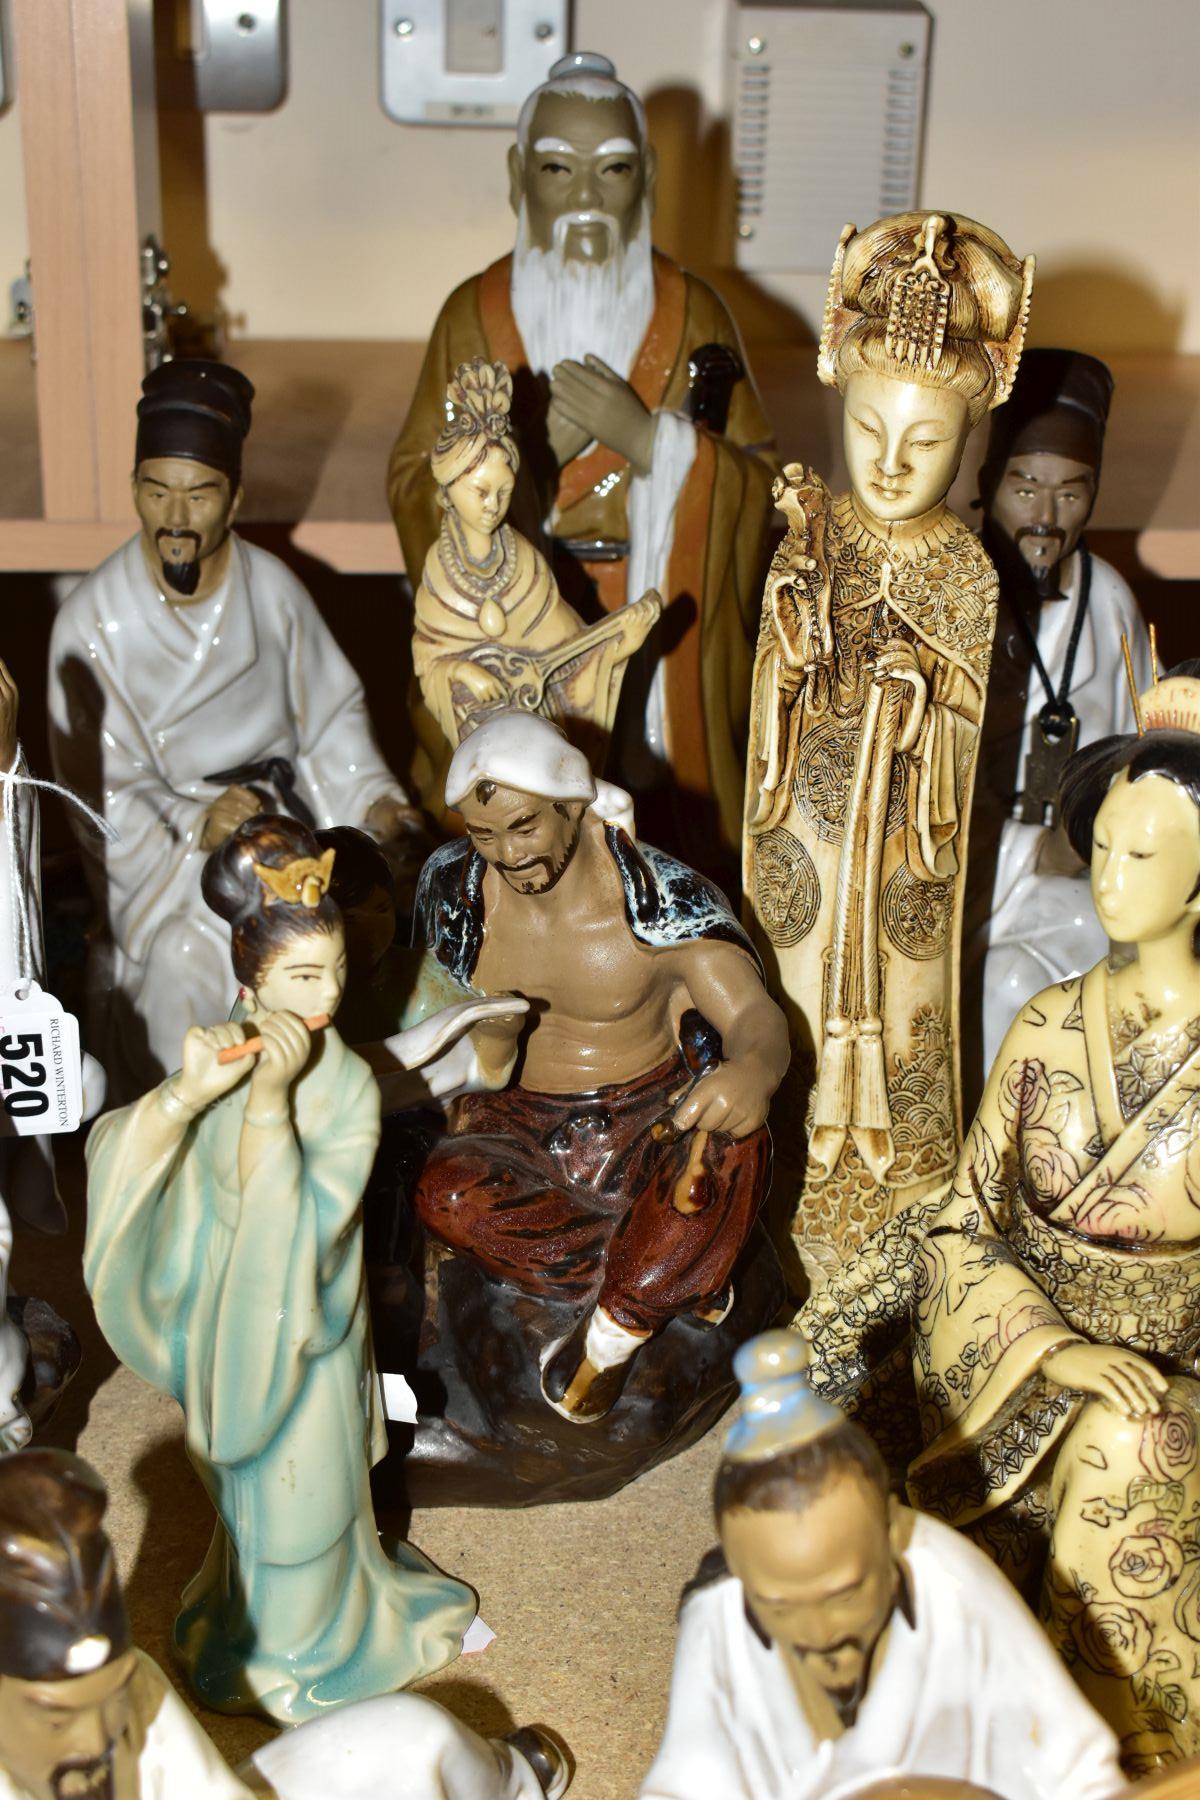 A GROUP OF MODERN ORIENTAL FIGURINES, to include fifteen figurines featuring people reading, fishing - Image 5 of 12